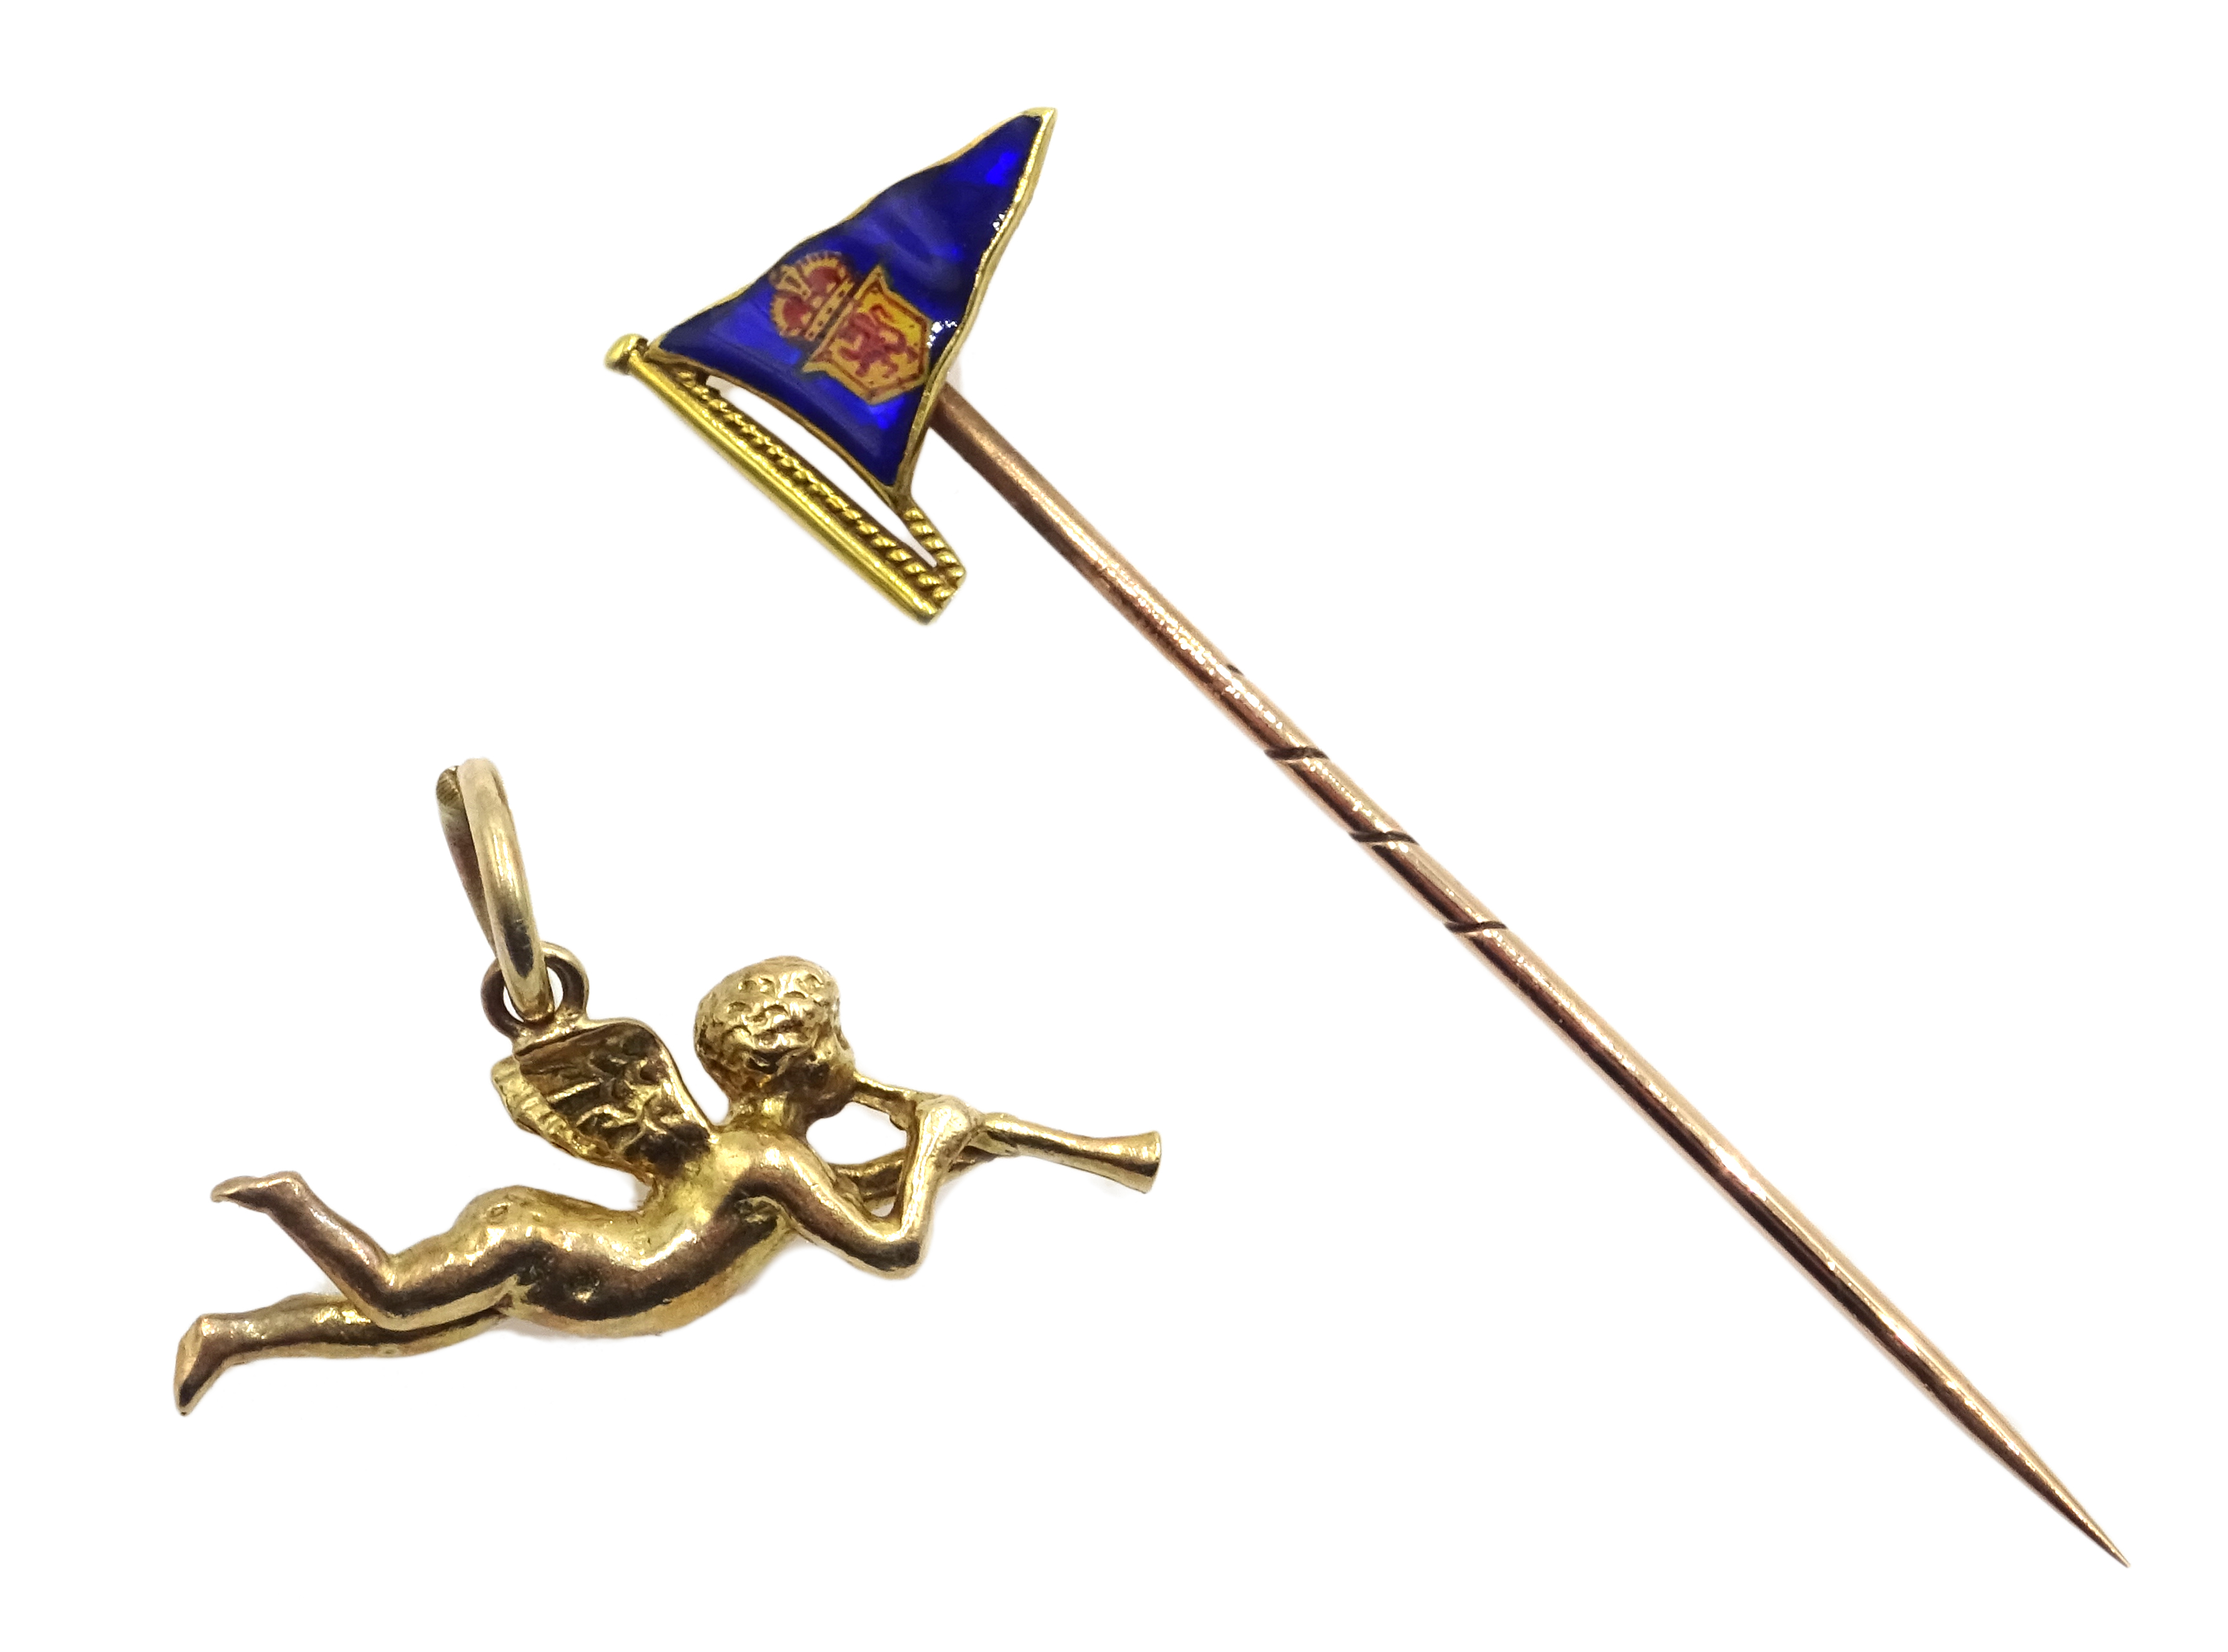 18ct gold and enamel Scottish pennant stick pin and a 9ct gold cherub charm hallmarked